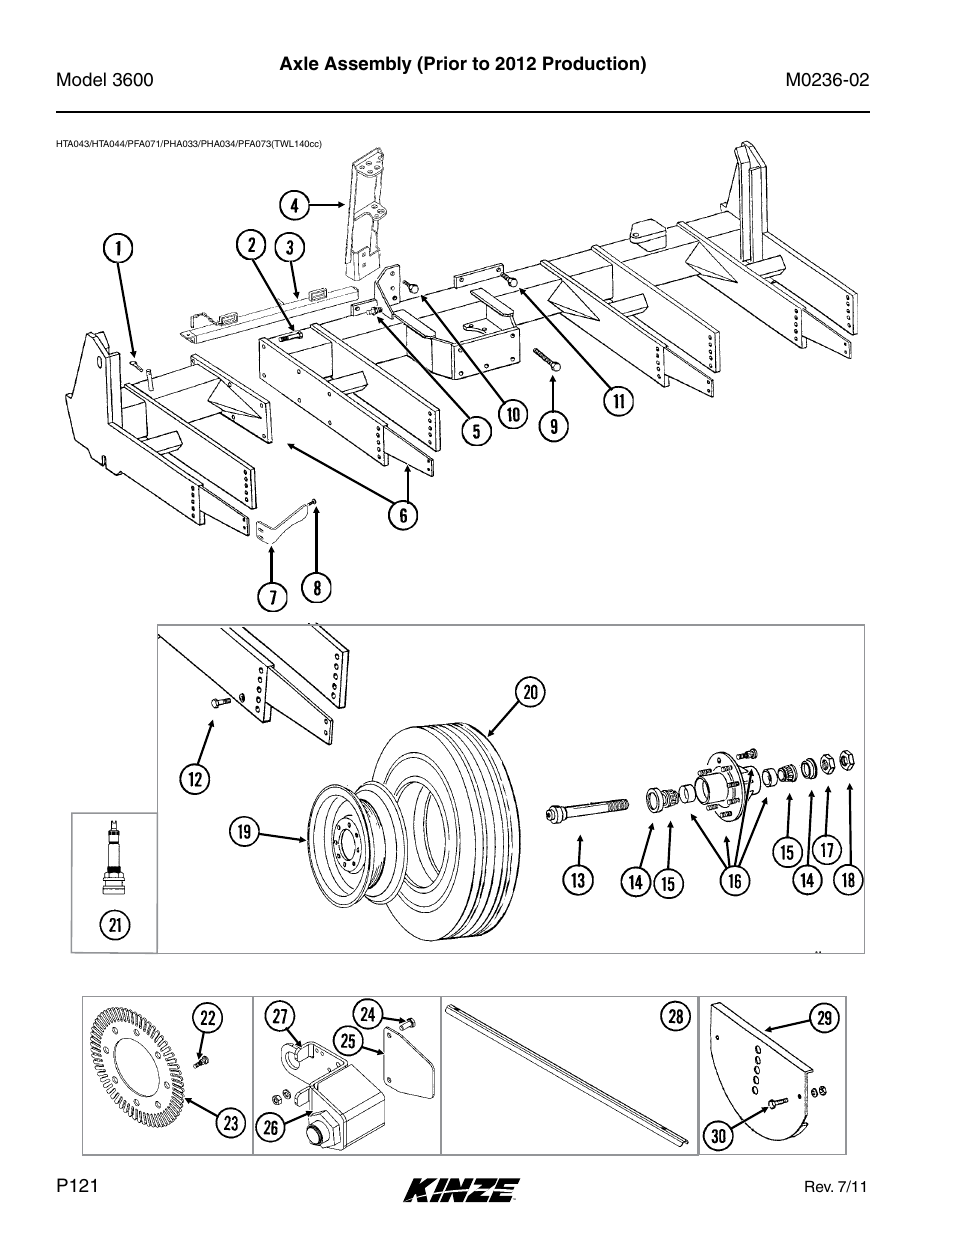 Axle assembly (prior to 2012 production) | Kinze 3600 Lift and Rotate Planter Rev. 5/14 User Manual | Page 124 / 302